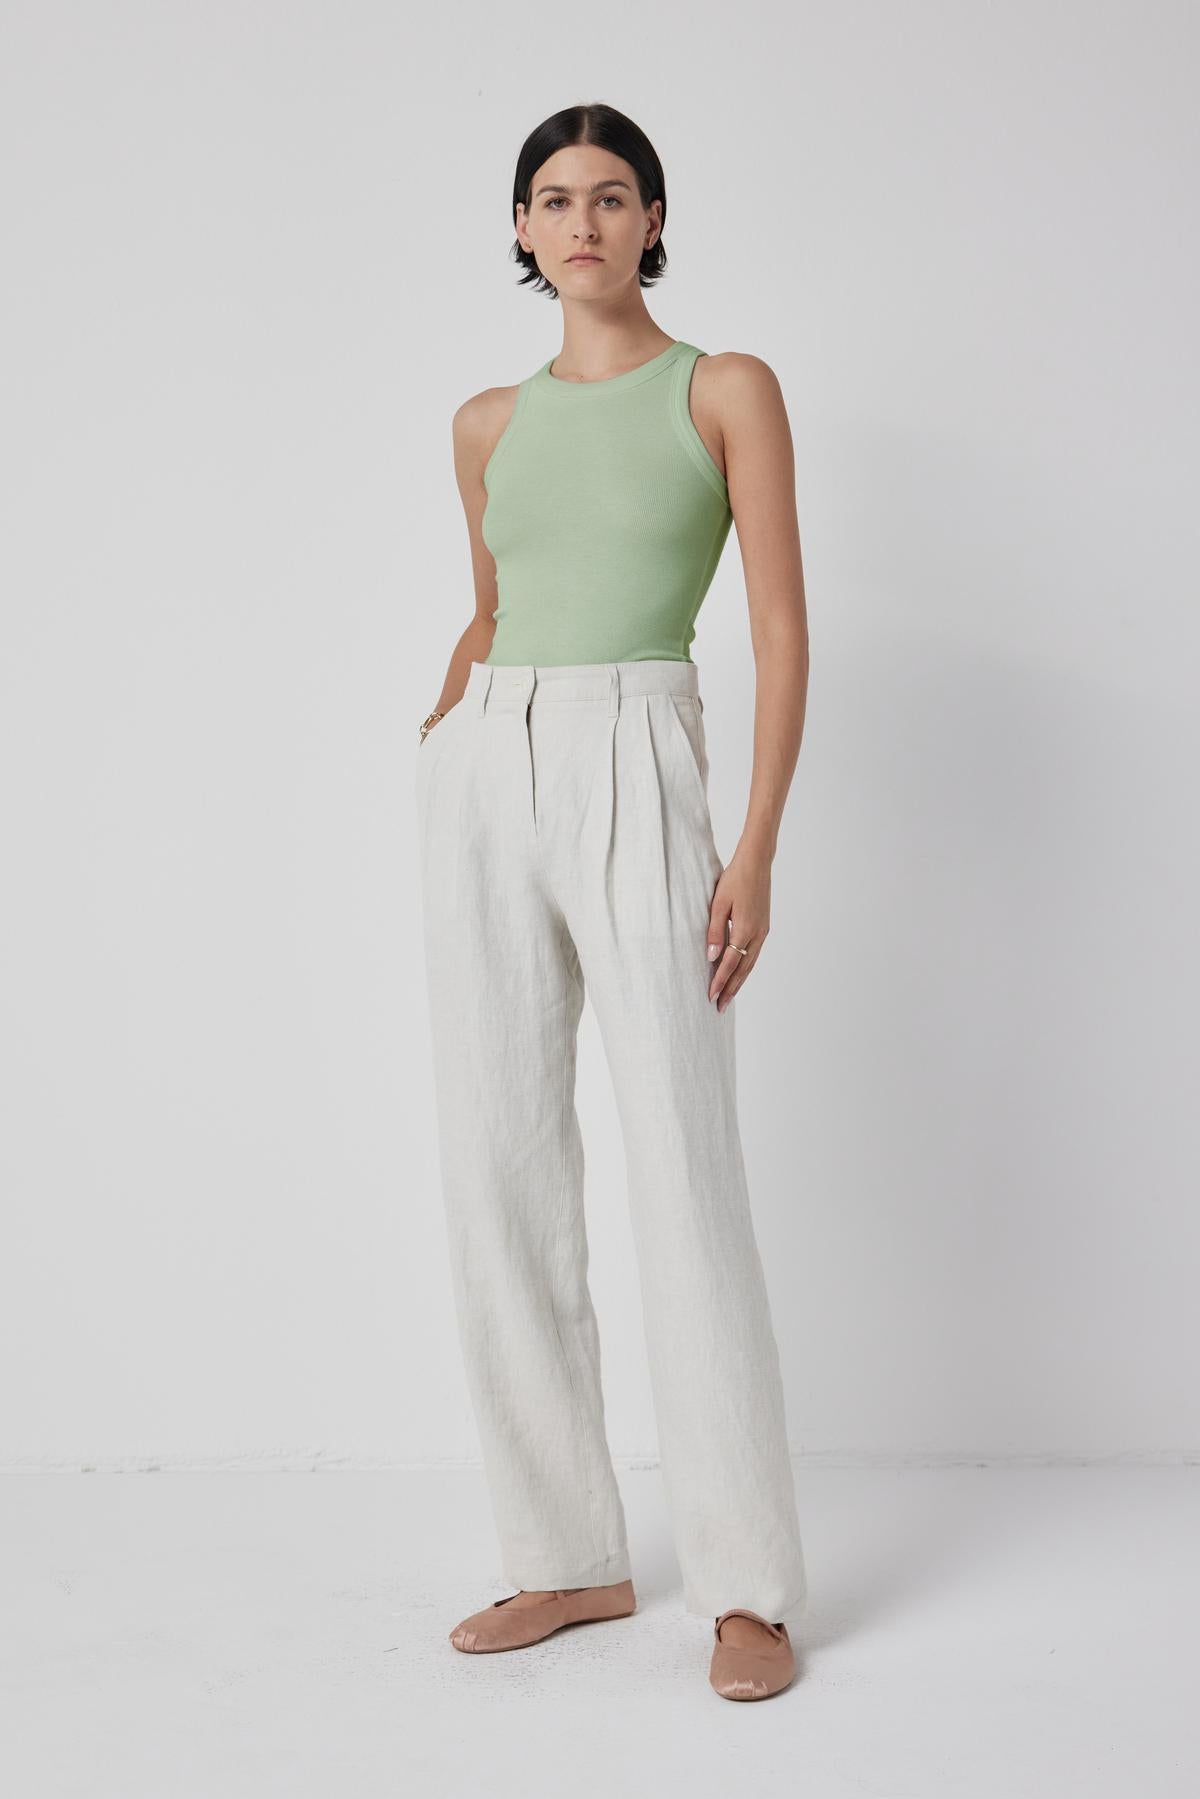 The model is wearing a green CRUZ tank top and white linen pants that showcase her toned body by Velvet by Jenny Graham.-36198188024001